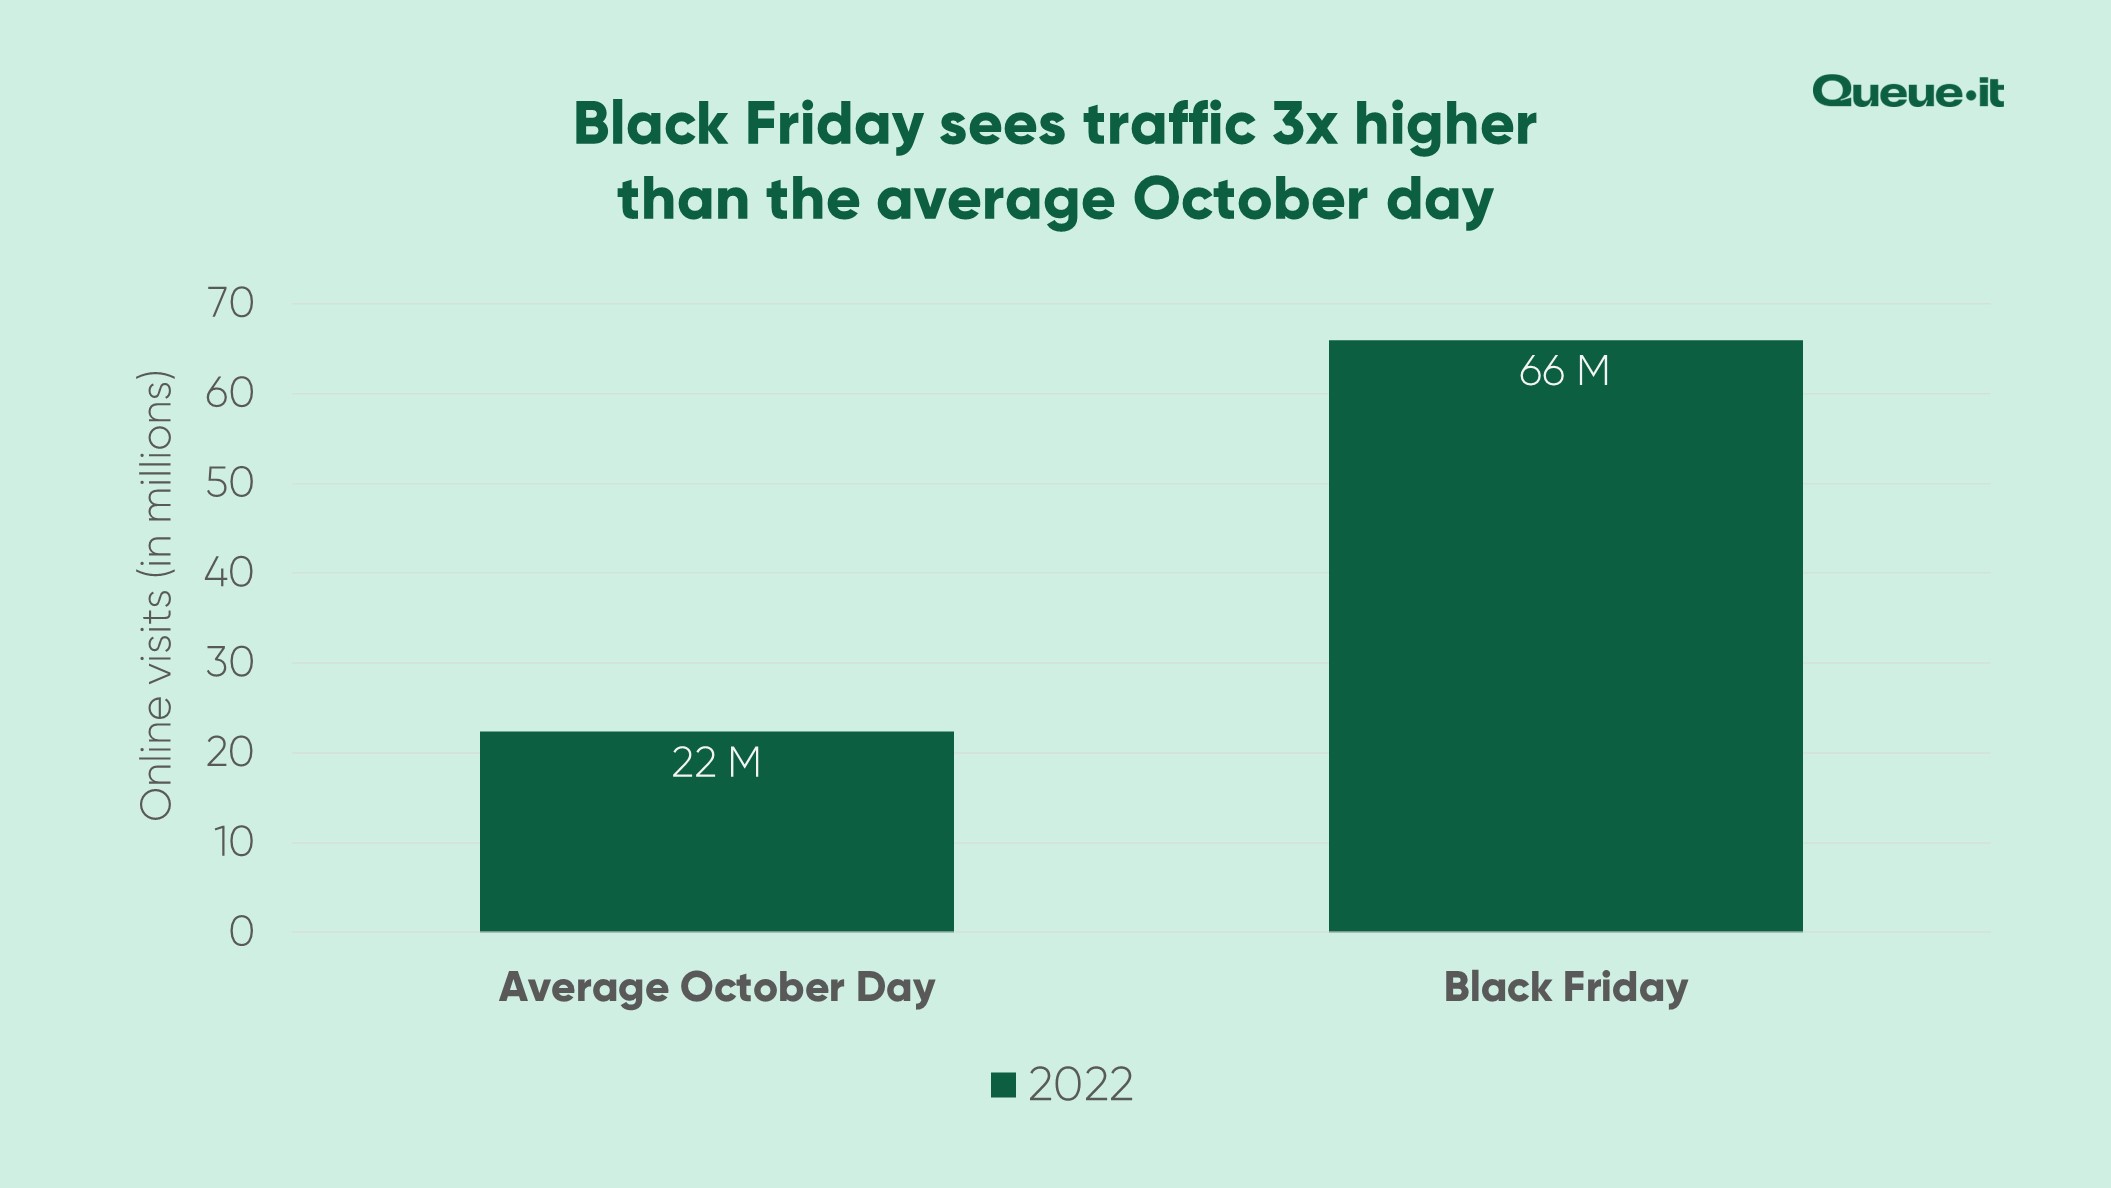 Black Friday sees traffic 3x that of normal October day